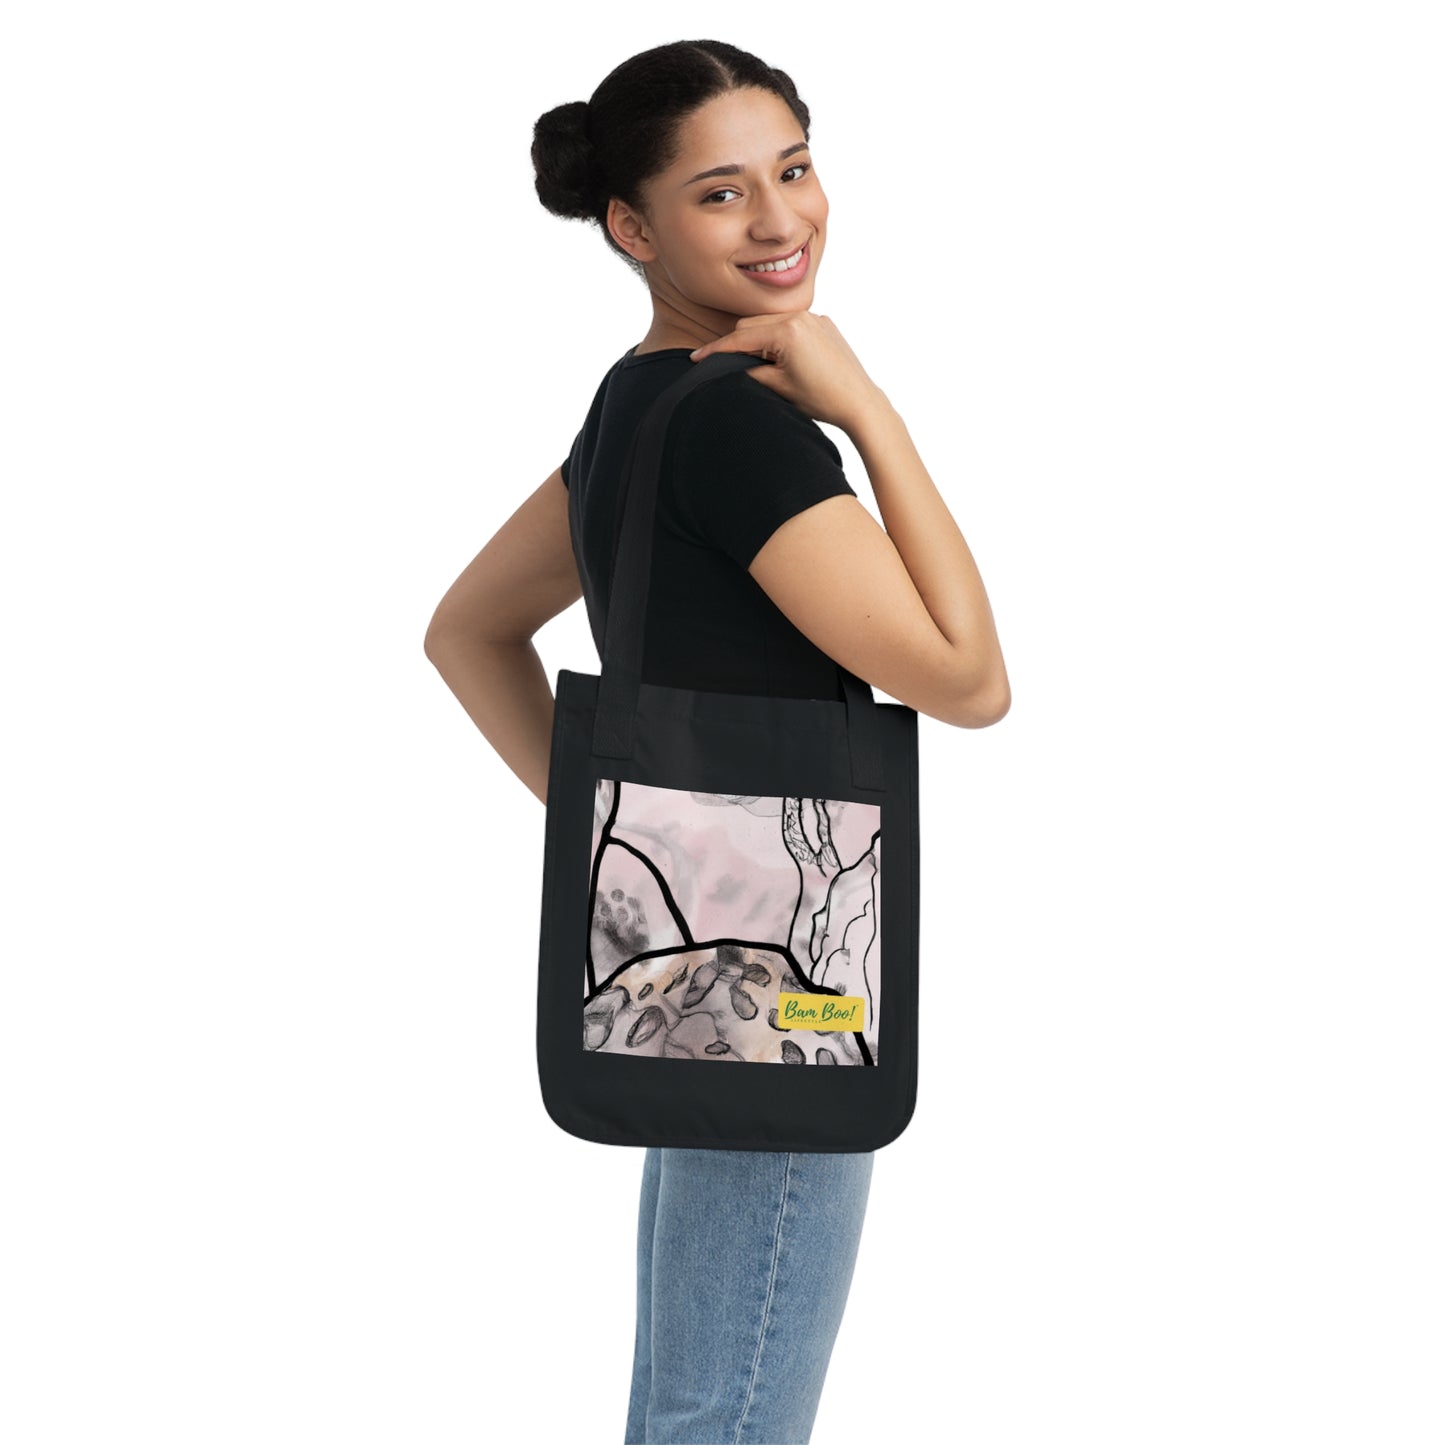 "The Natural Exuberance of Abstraction" - Bam Boo! Lifestyle Eco-friendly Tote Bag